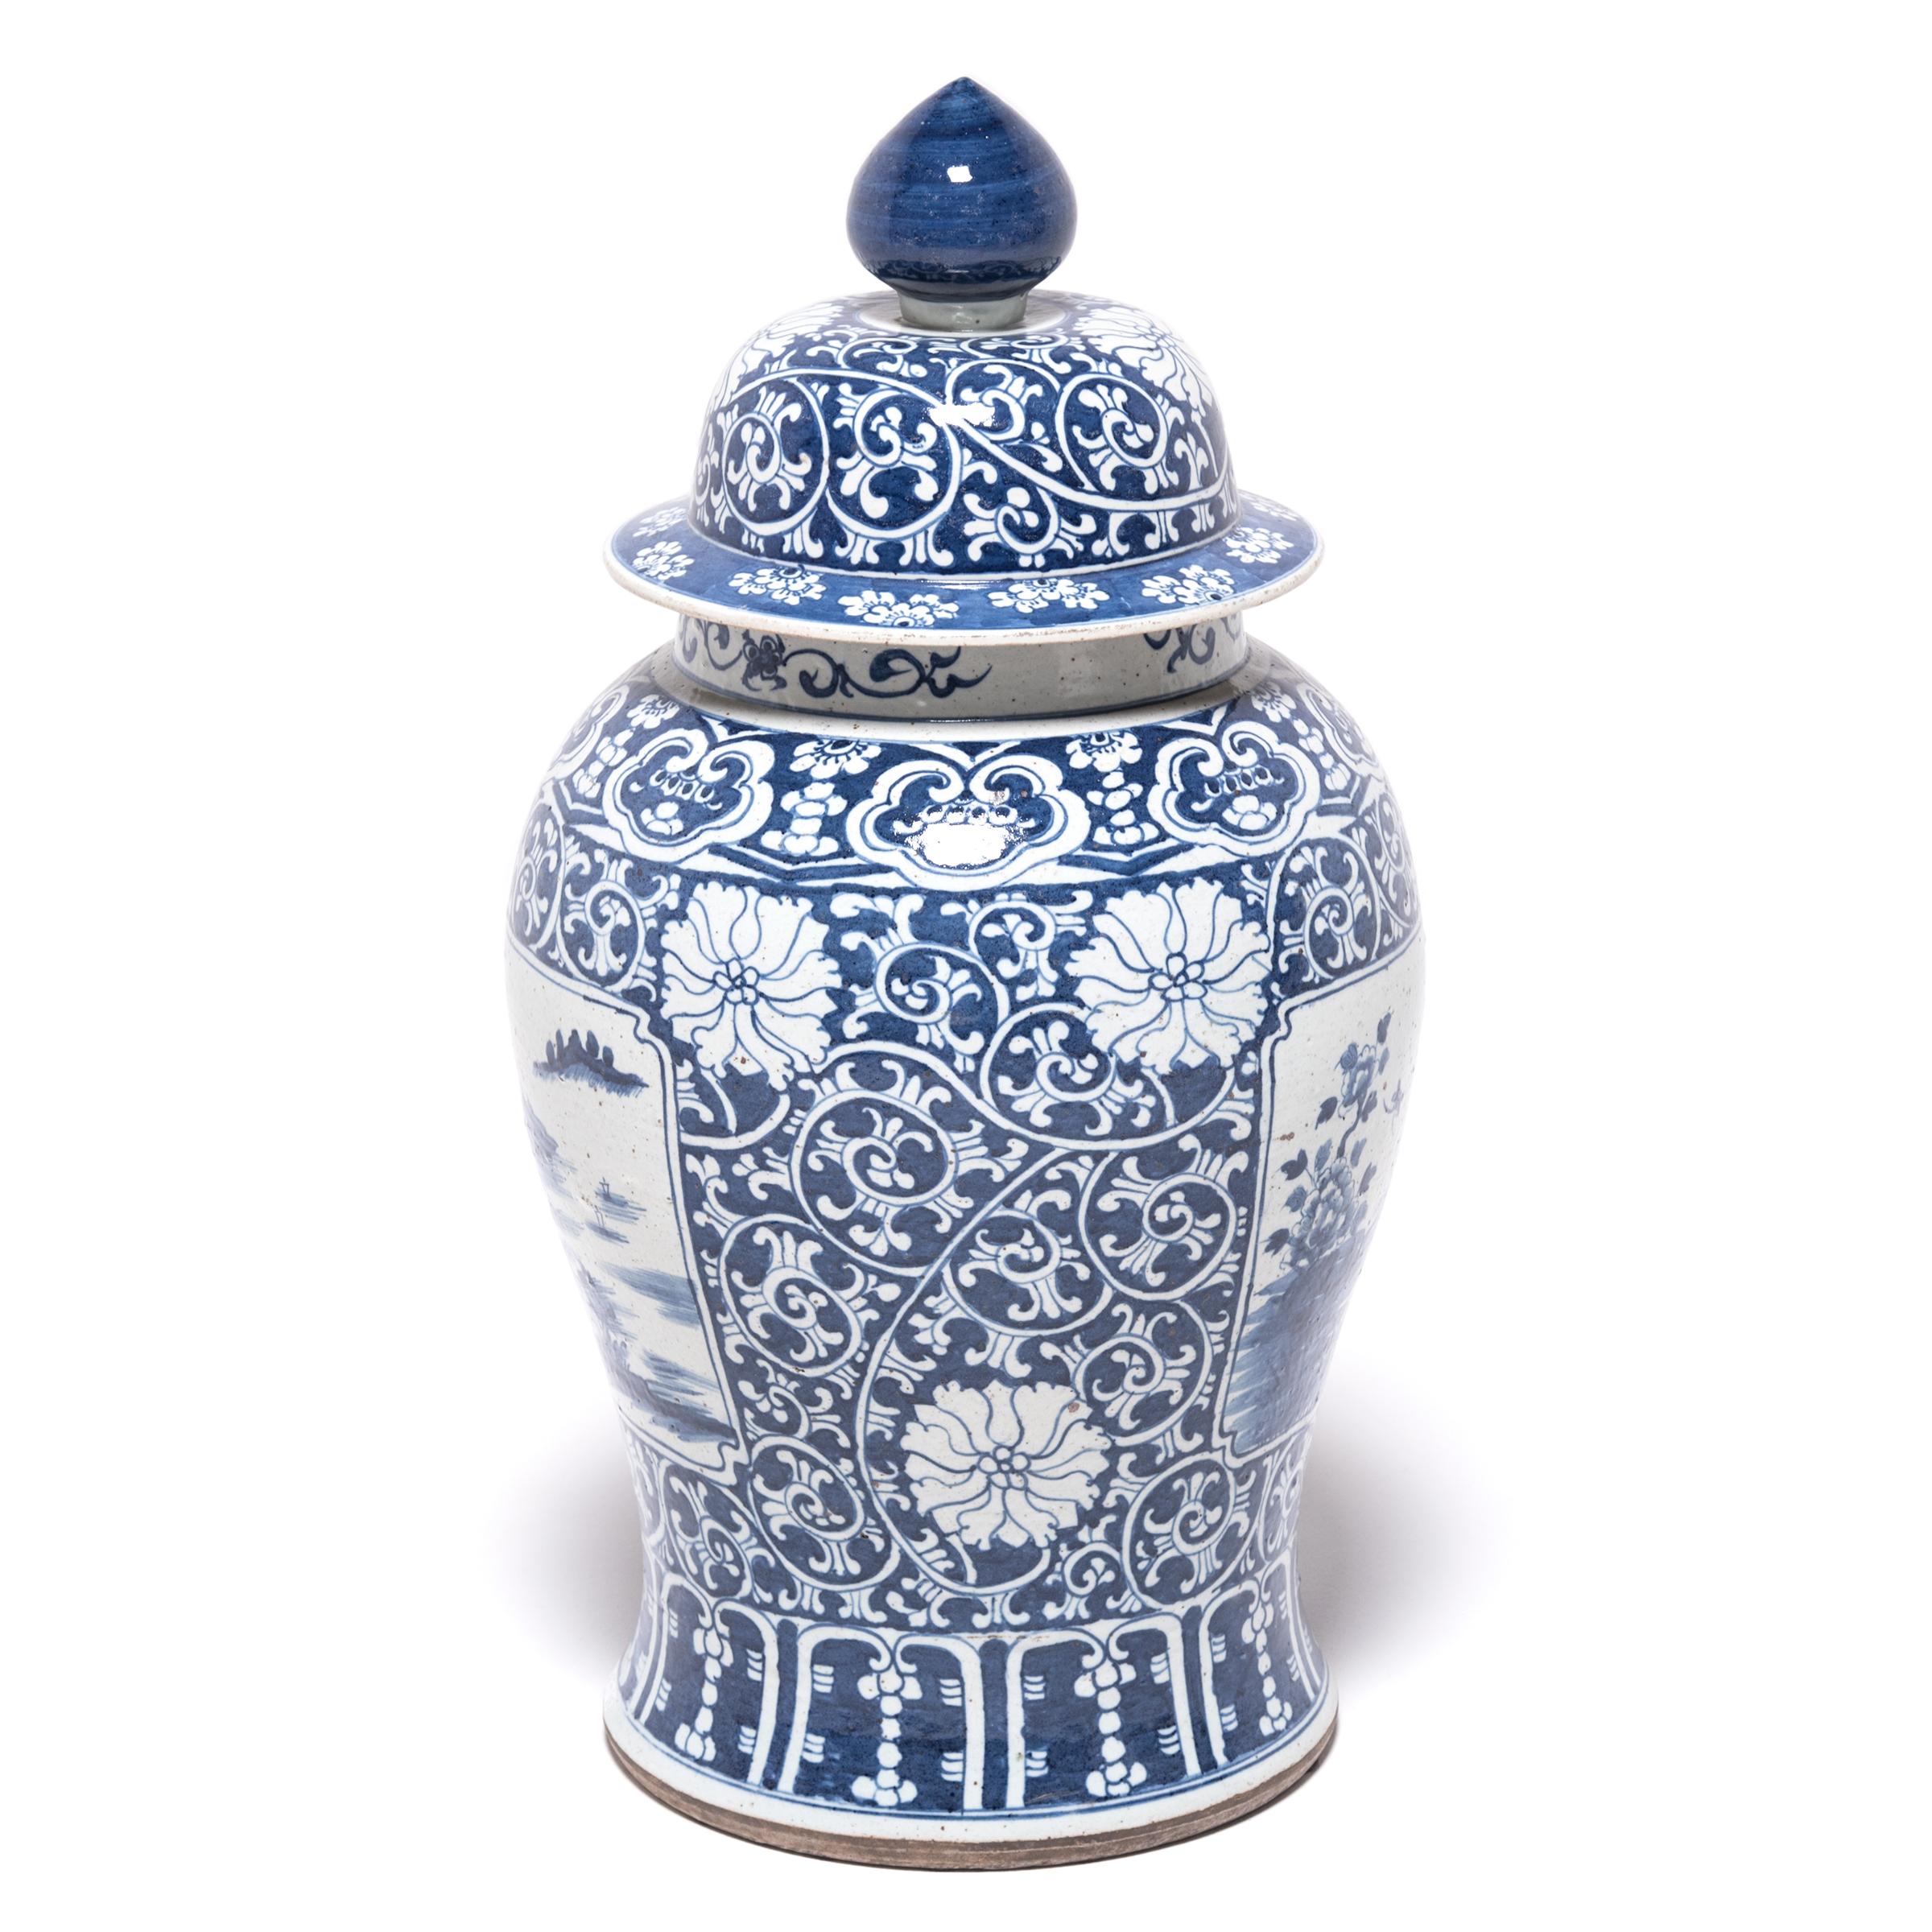 This blue and white baluster jar was made in the Jiangxi region of China. The landscape scenes hand painted by feathery brushstrokes are richly evocative and bring to mind ancient China. Jars of this shape were popular with noblemen who sent them to